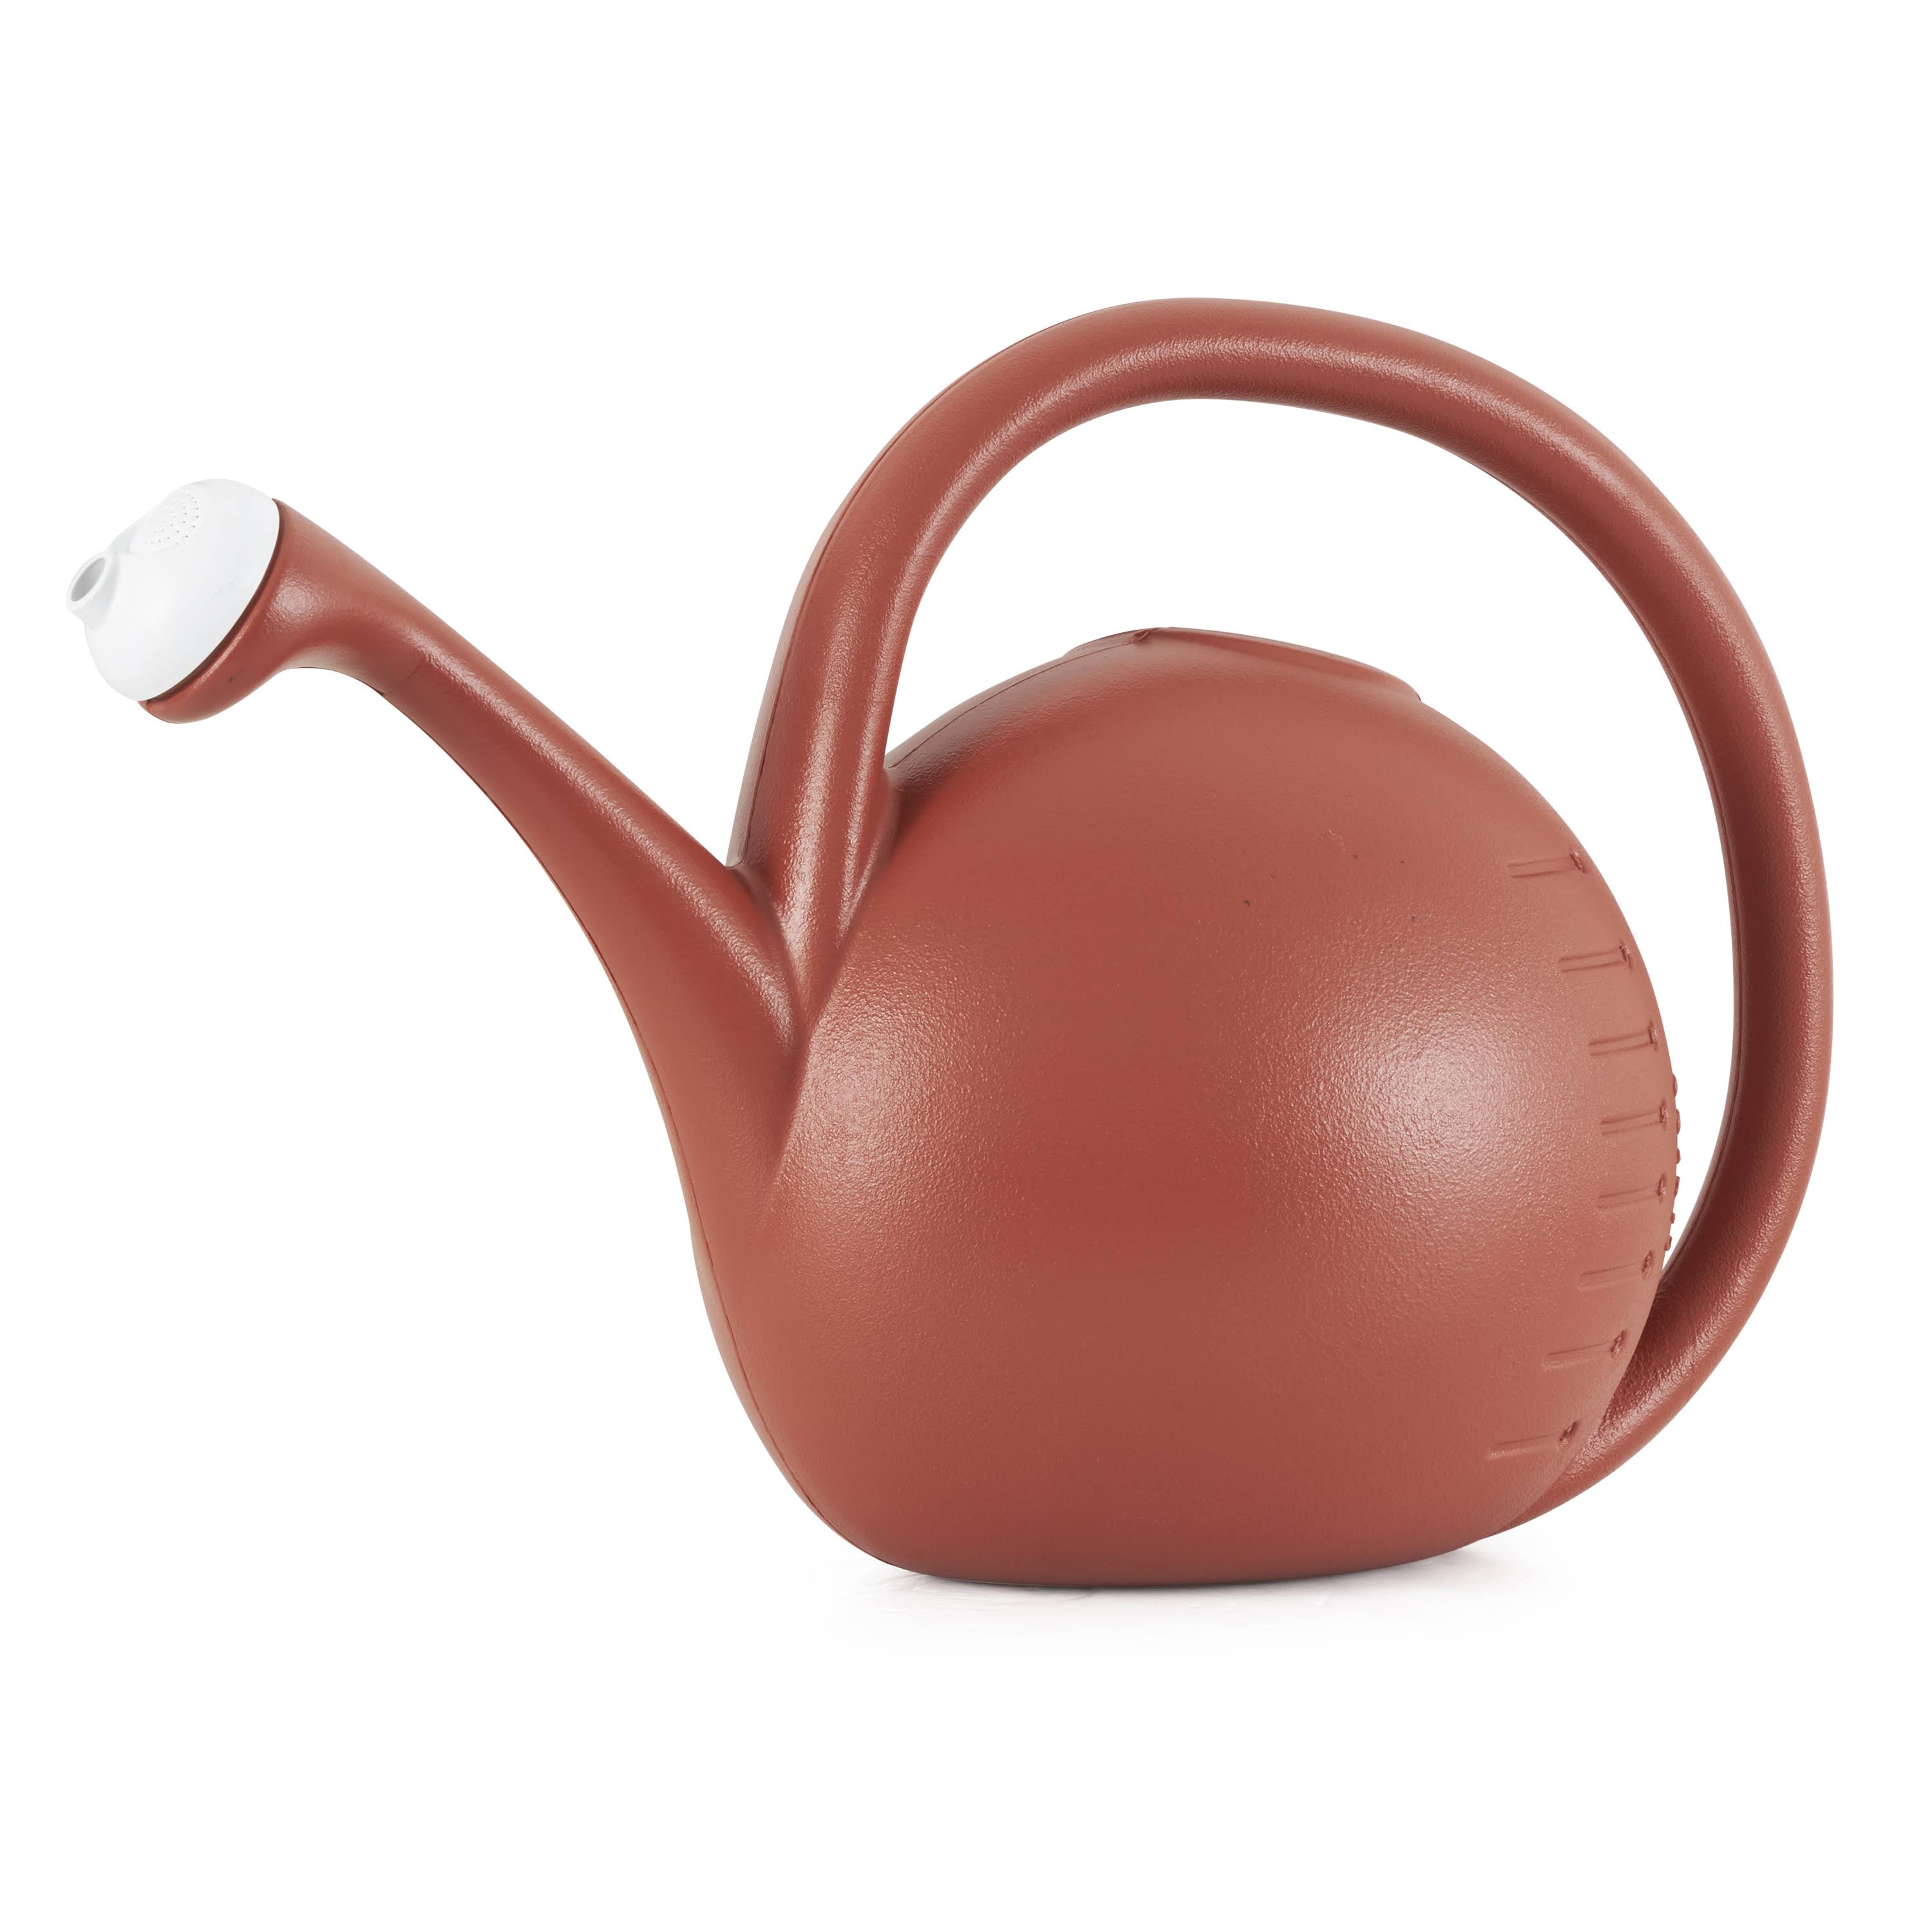 Akro Mils RZWC2G0E35 Watering Can - Clay, 2Gallon